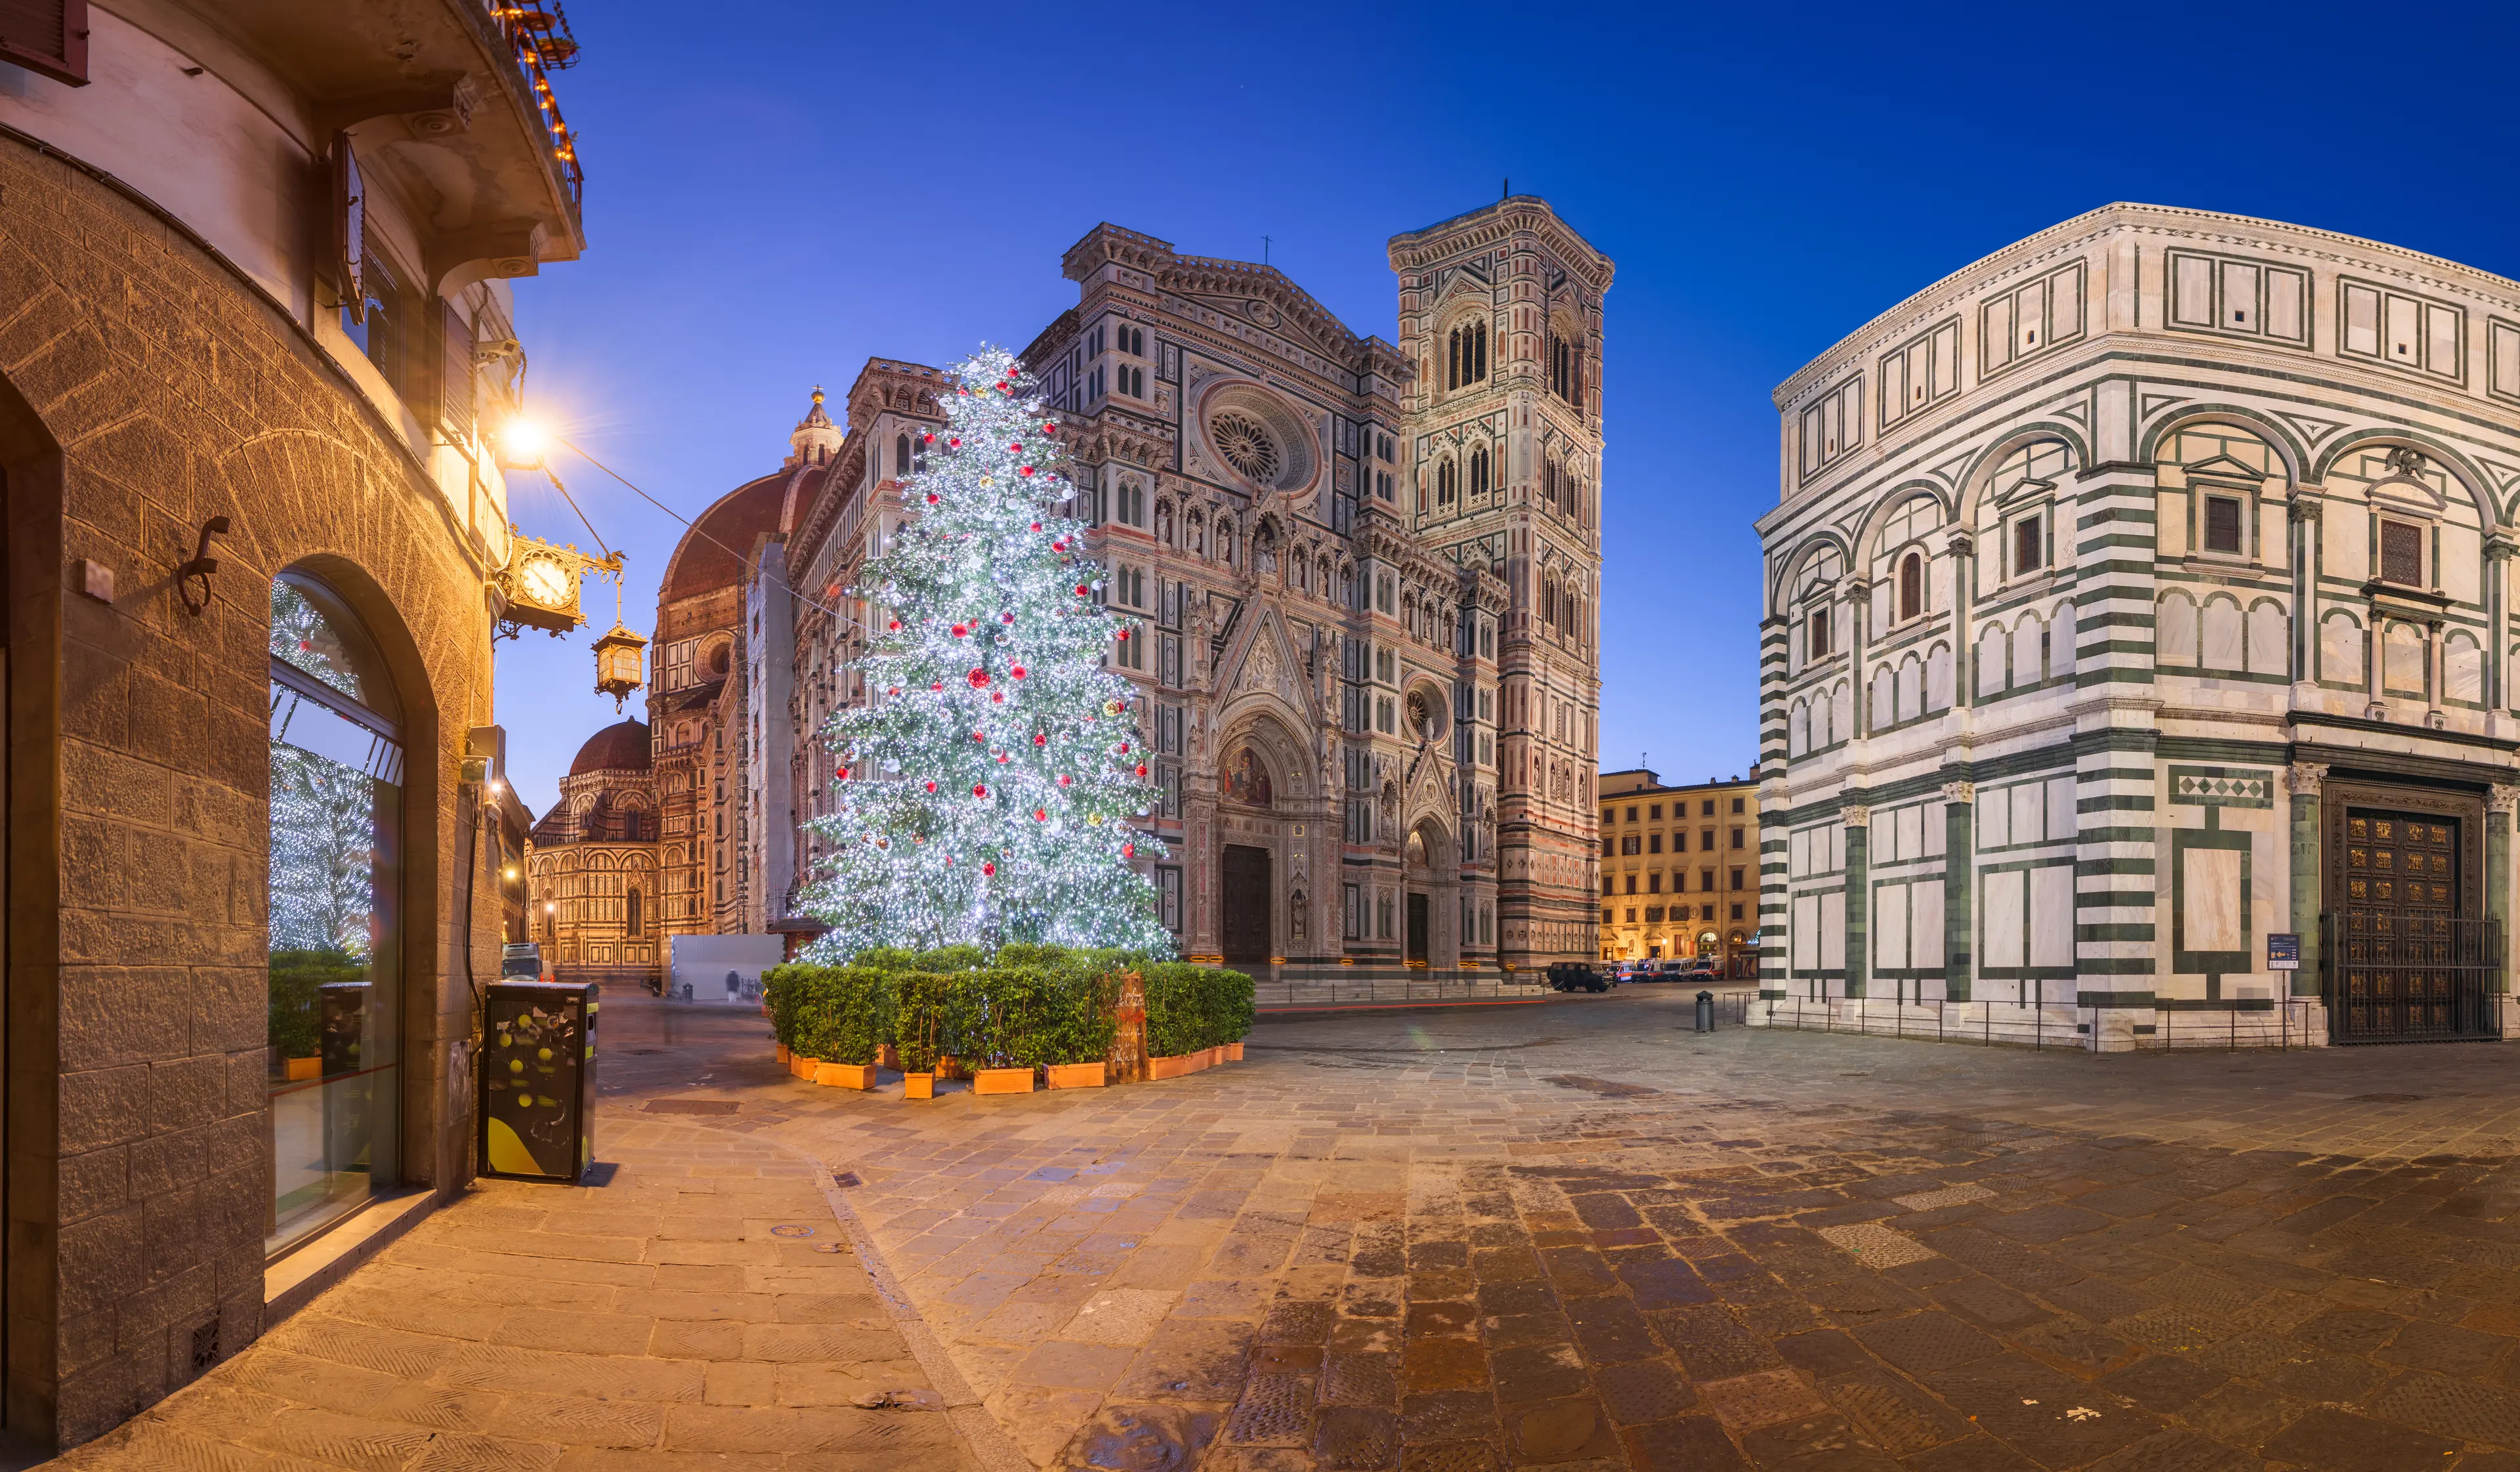 3-Day Family Christmas Holiday Itinerary in Florence, Italy